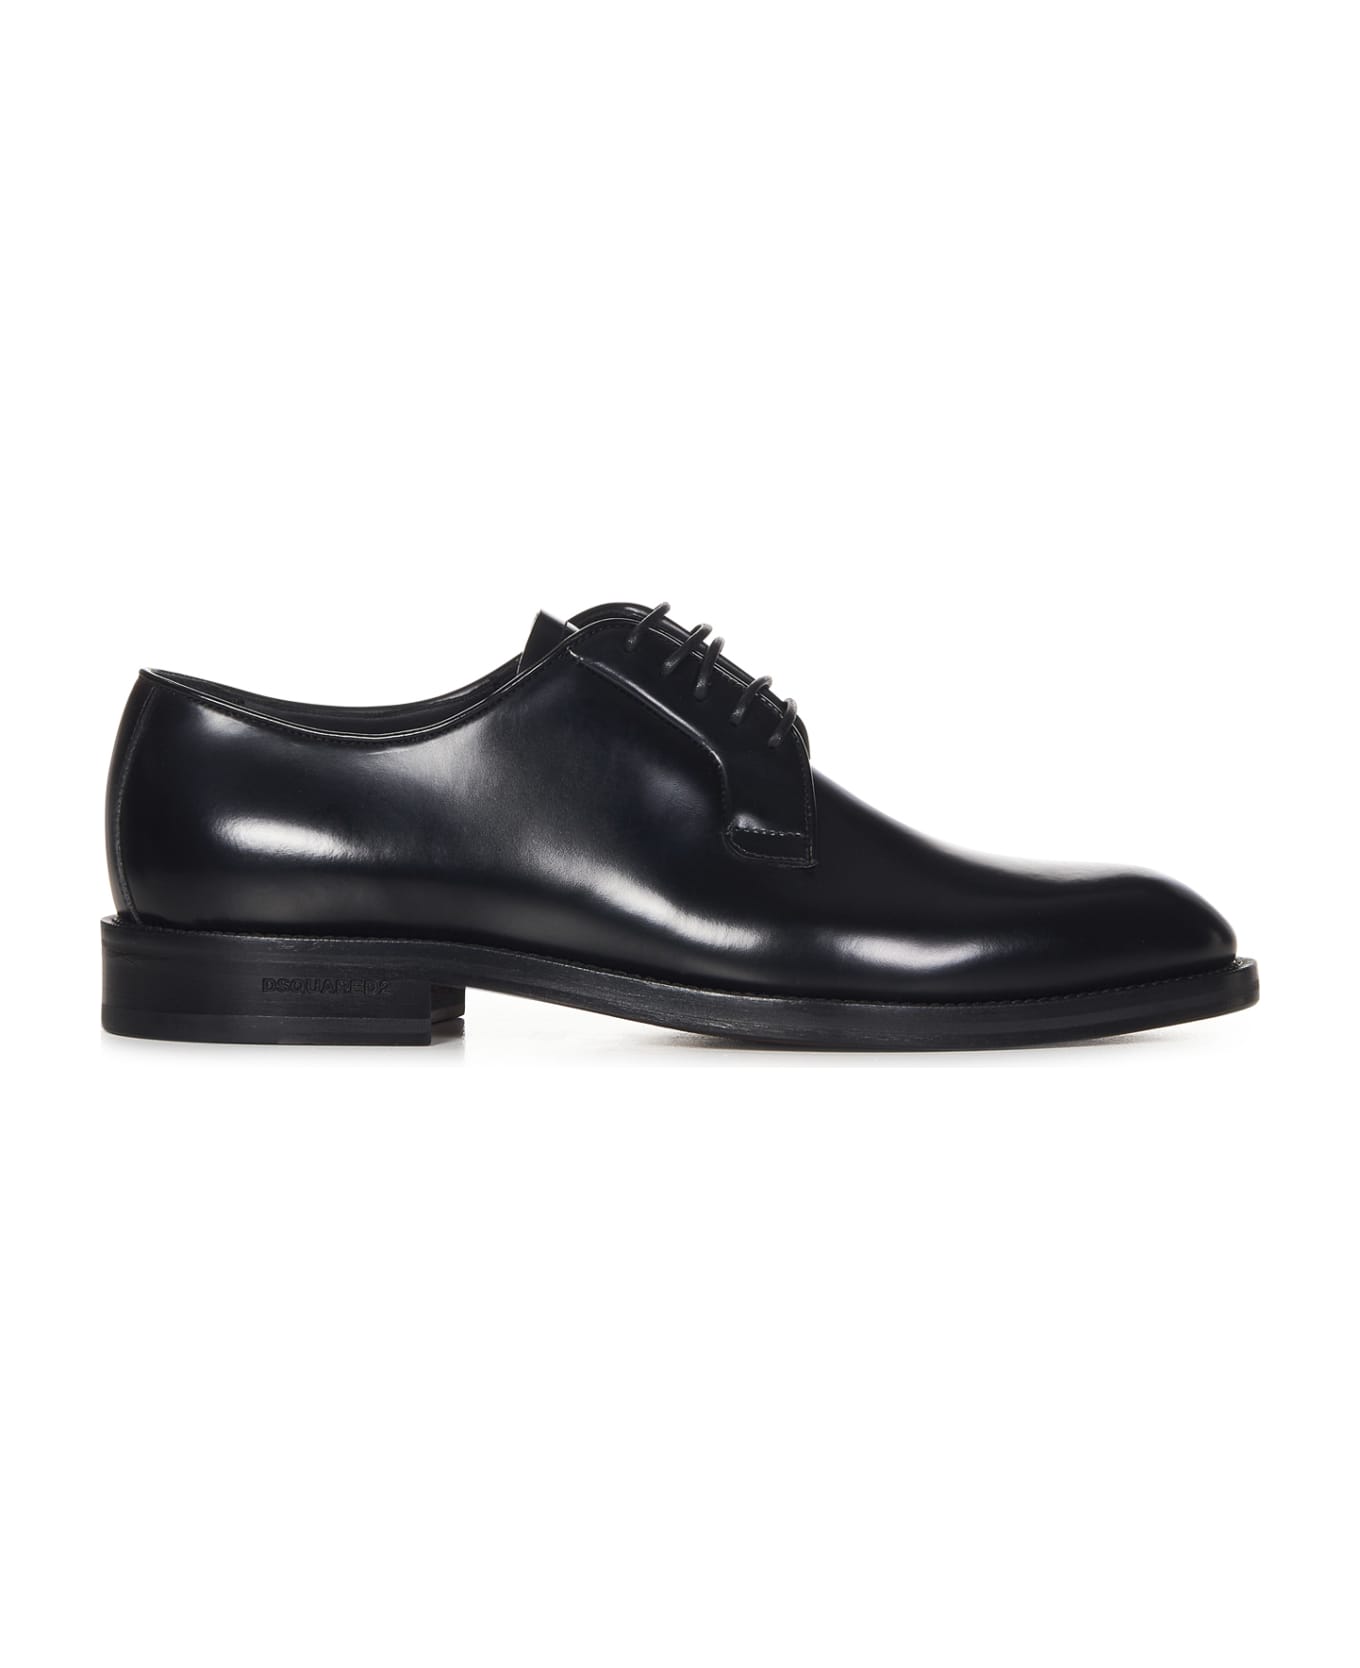 Dsquared2 Lace-up Derby Shoes - Black ローファー＆デッキシューズ